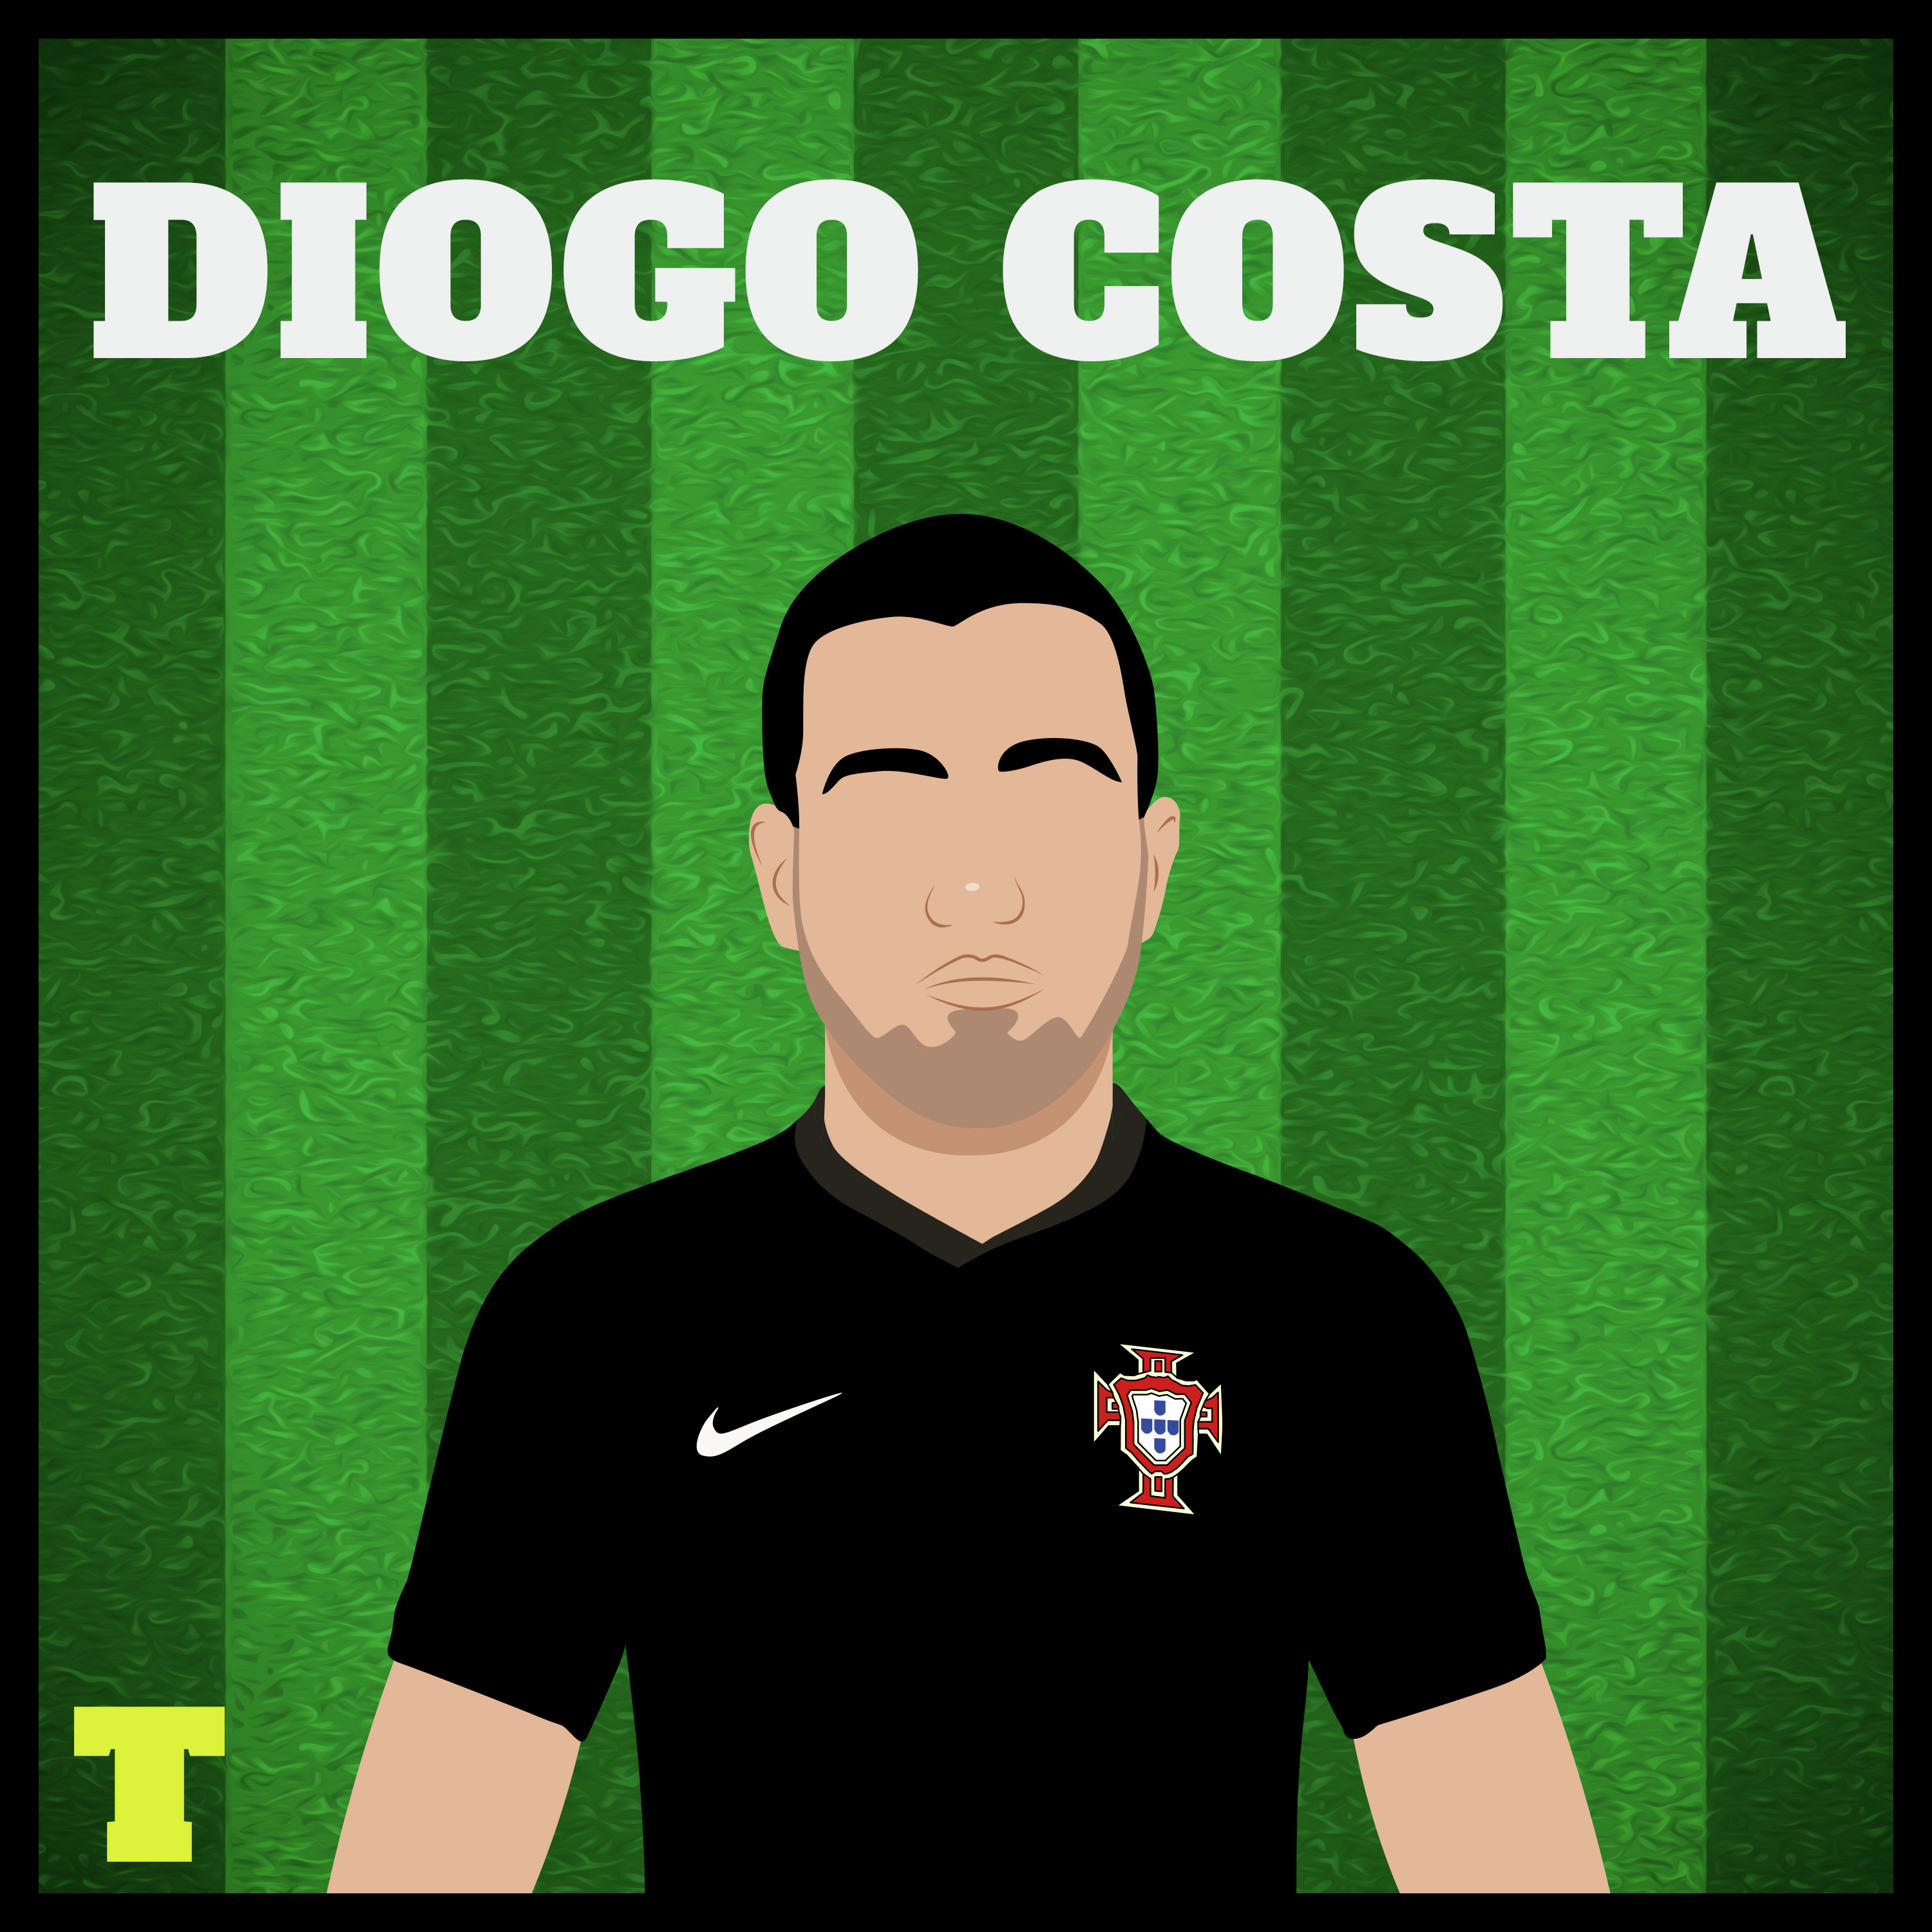 Diogo Costa, the goalkeeper who likes to score goals